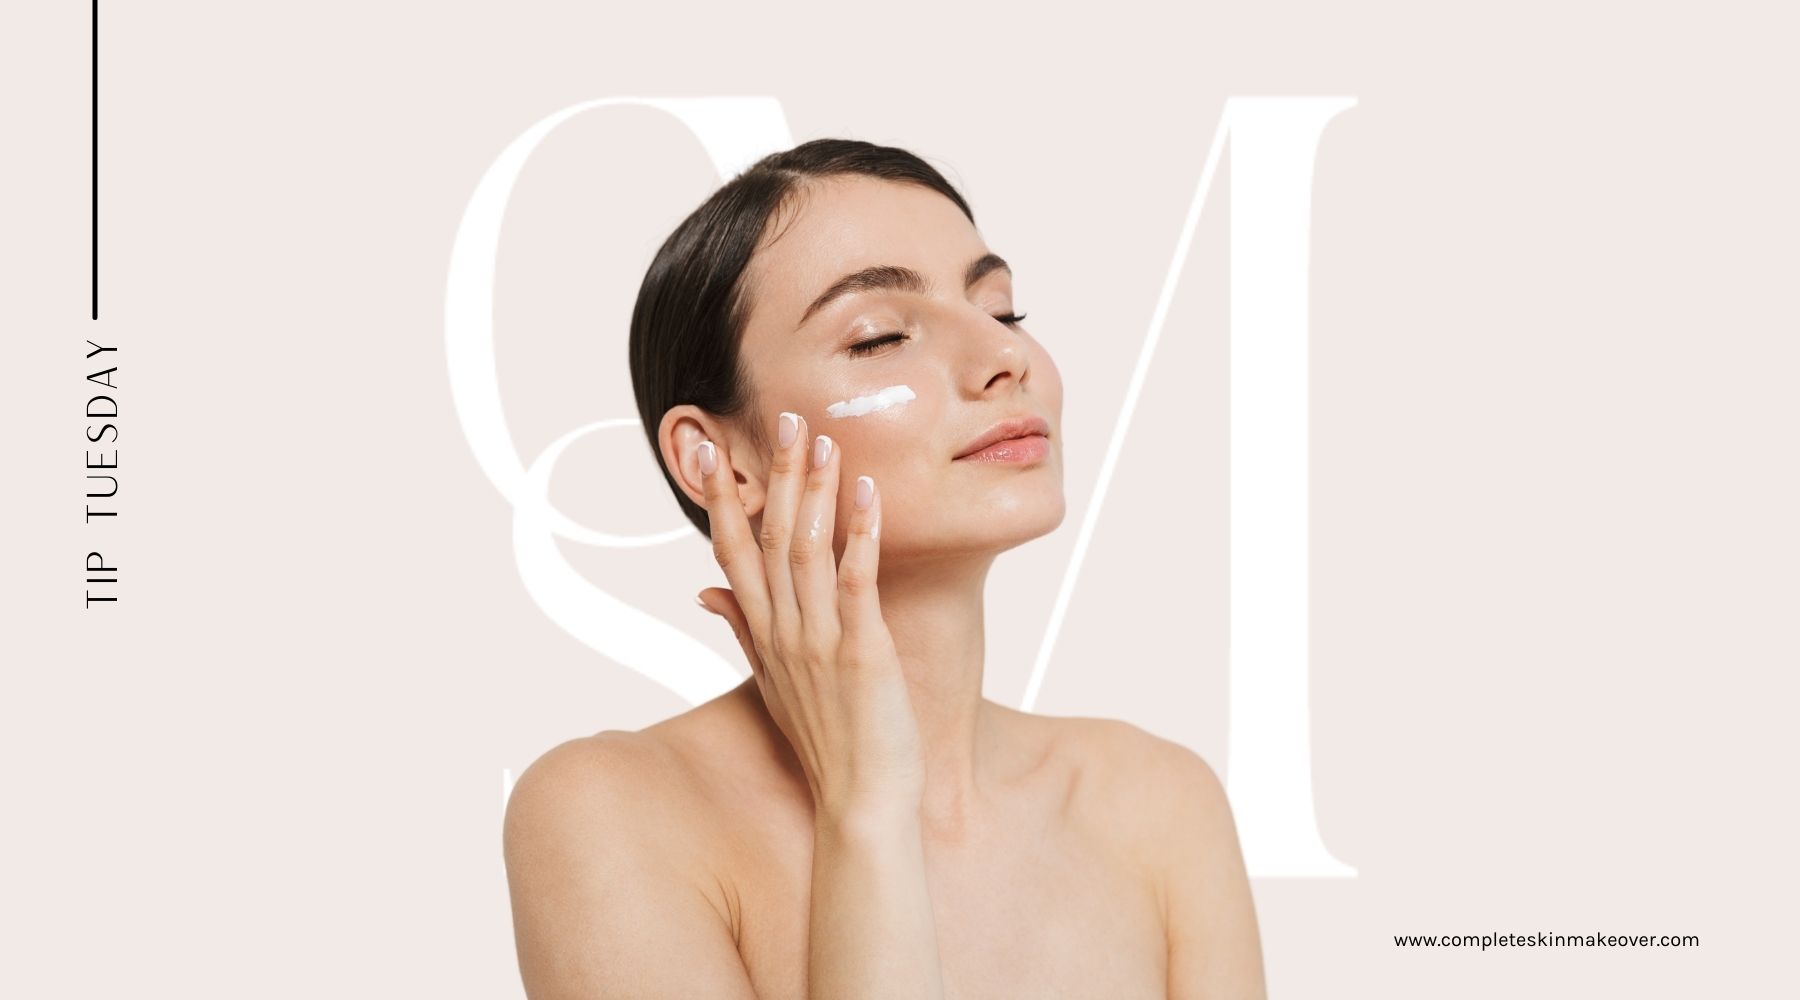 CSM Tip Tuesday: How To Love Your Skin [Healthy Habits]